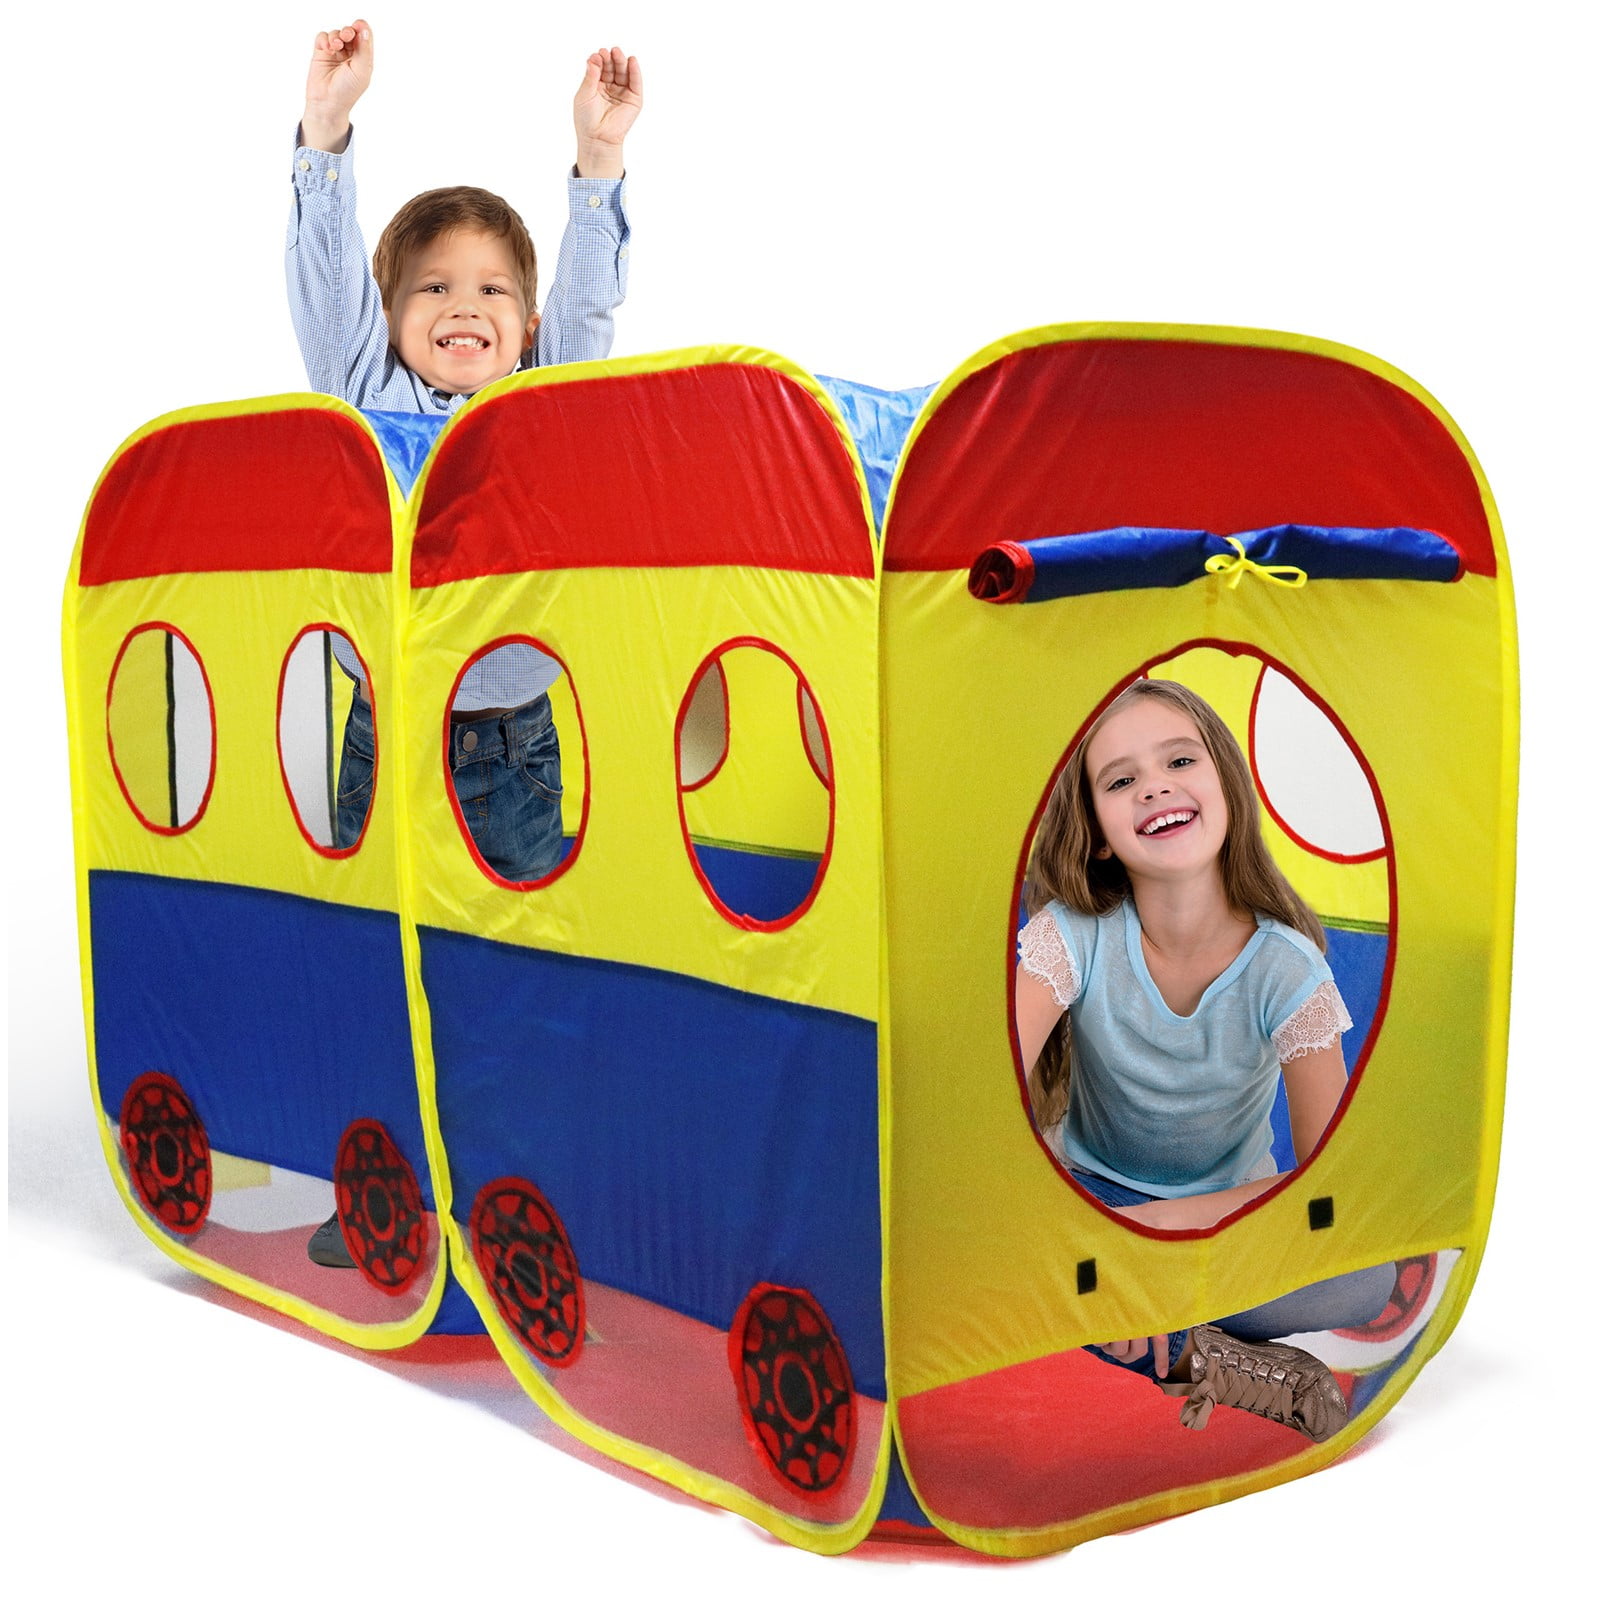 Vokodo Kids Pop Up School Bus Play Tent Magical Playhouse Tunnel Folding  Indoor Outdoor Bright Colors Pretend Imagination Creative Learning Toys  Great 